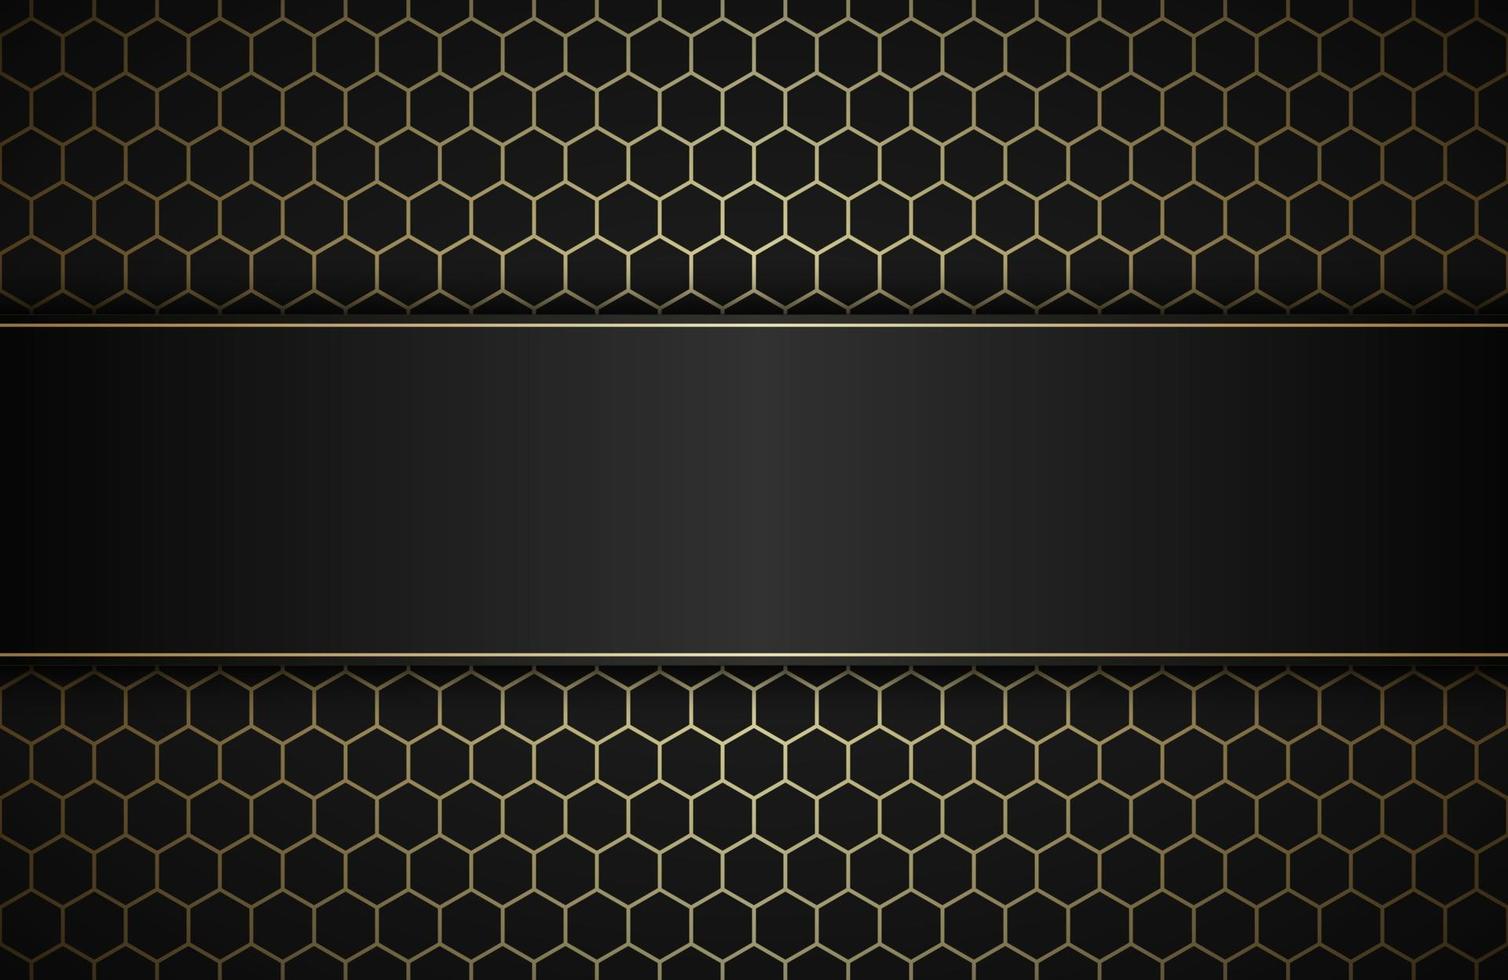 Geometric polygons background with free space for your text. Abstract black and gold metallic wallpaper. Simple vector illustration